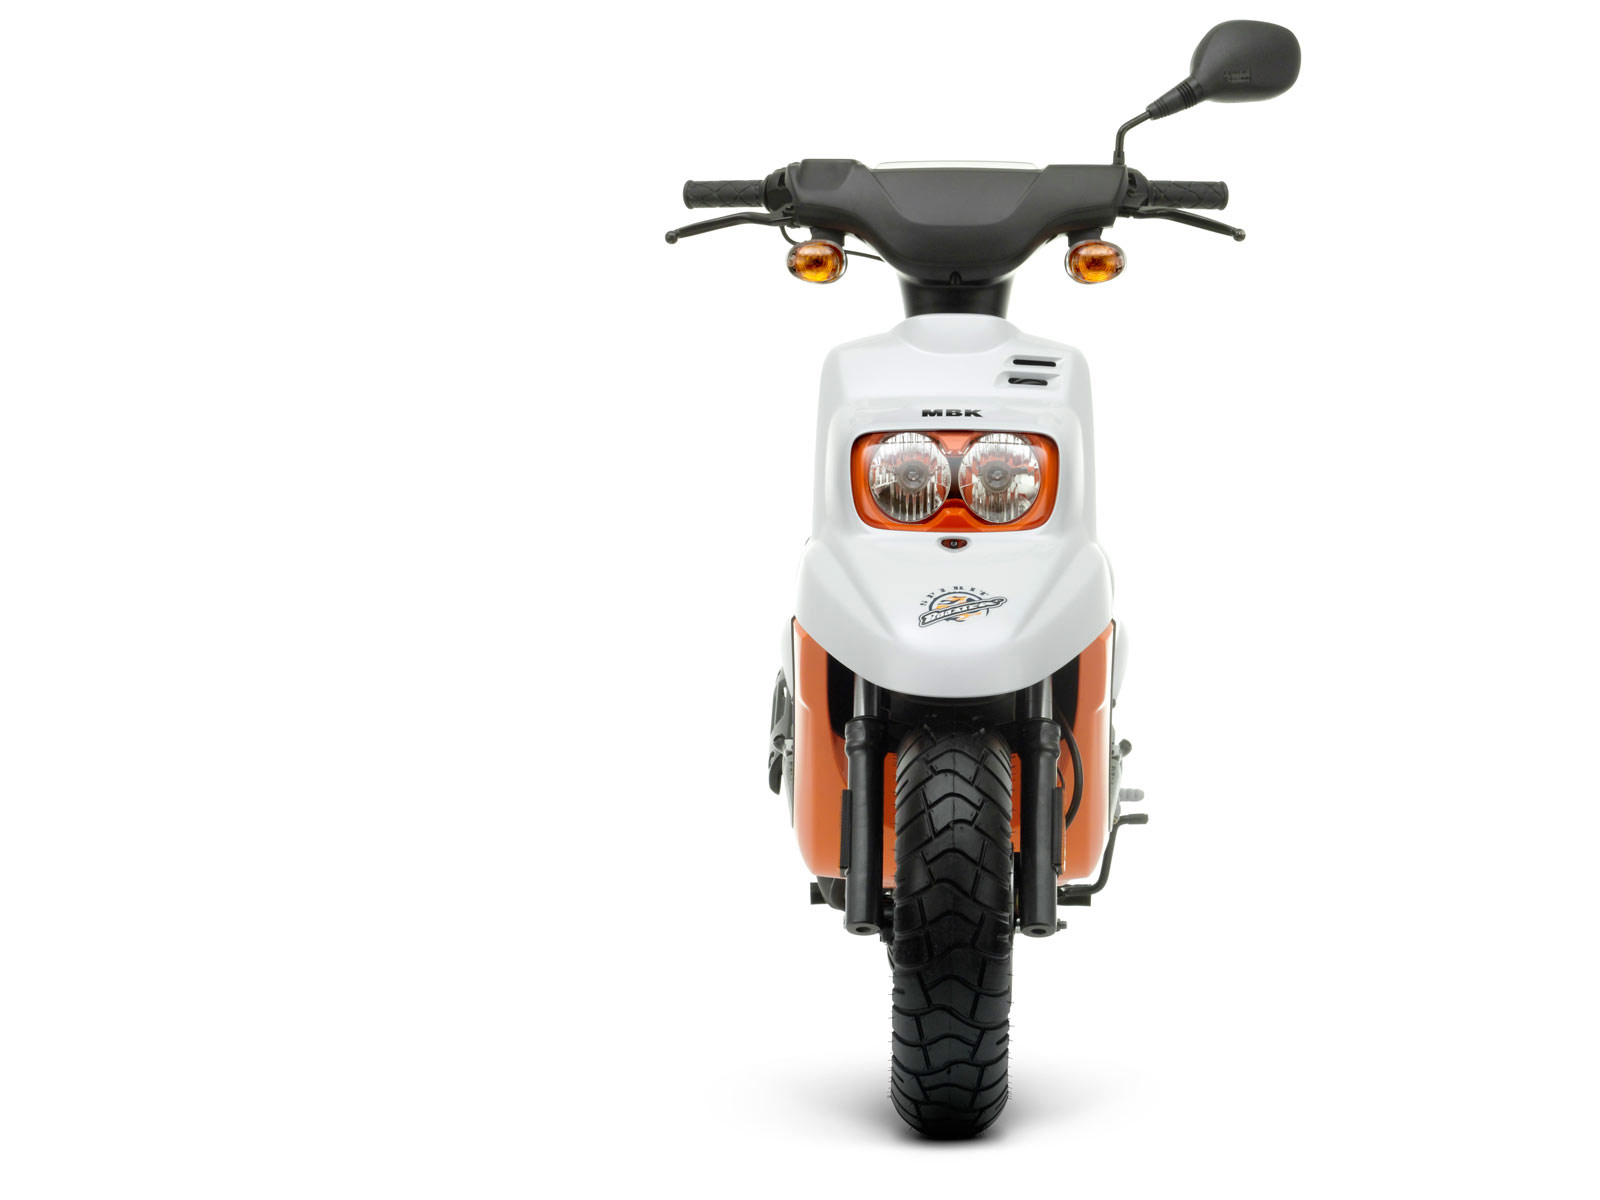 2009 MBK Booster Scooter pictures, specifications